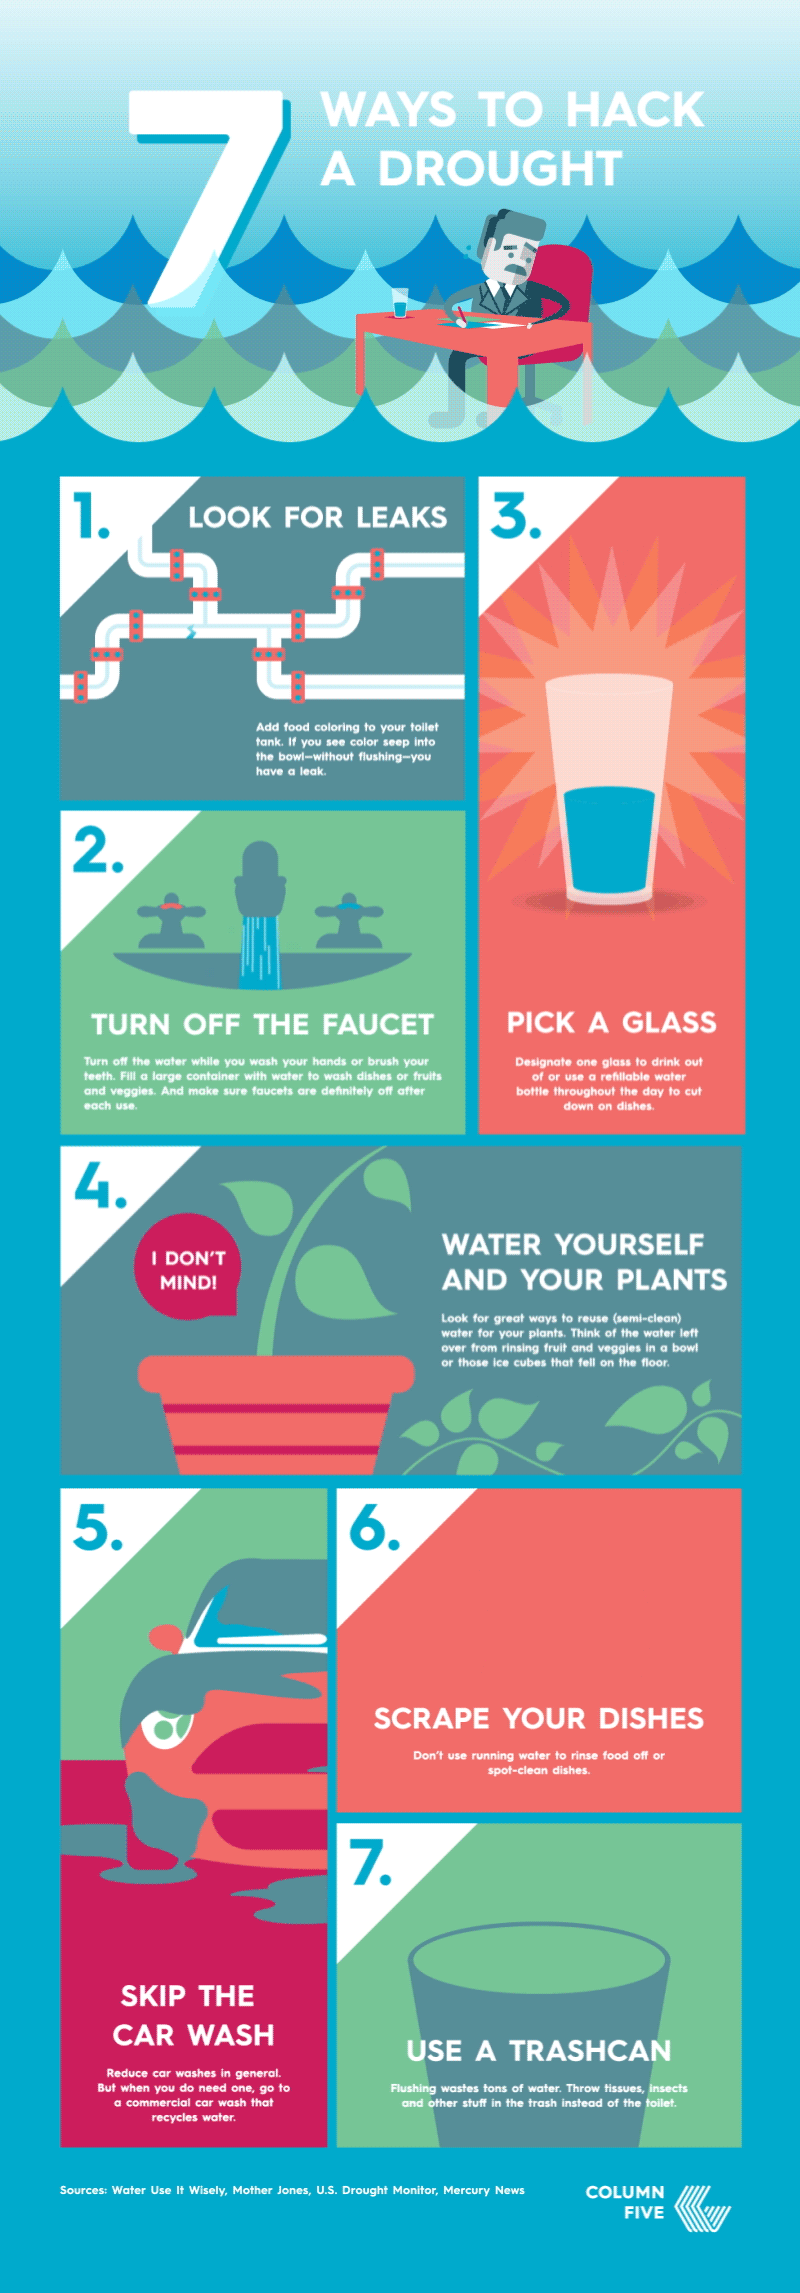 7 Ways to Hack a Drought by Column Five